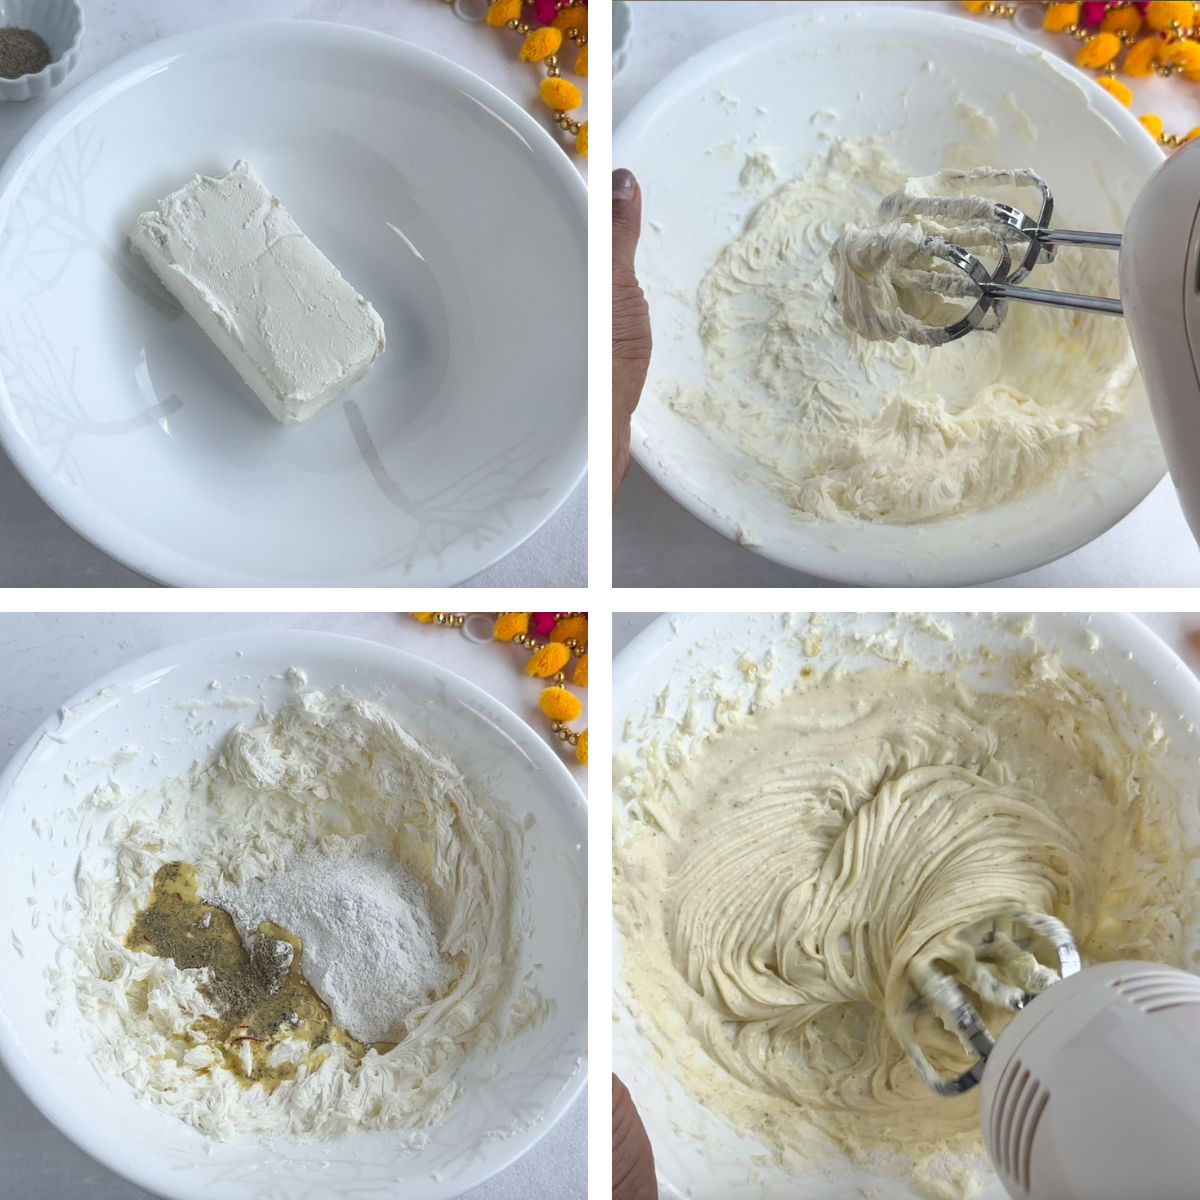 steps on how to make cheesecake